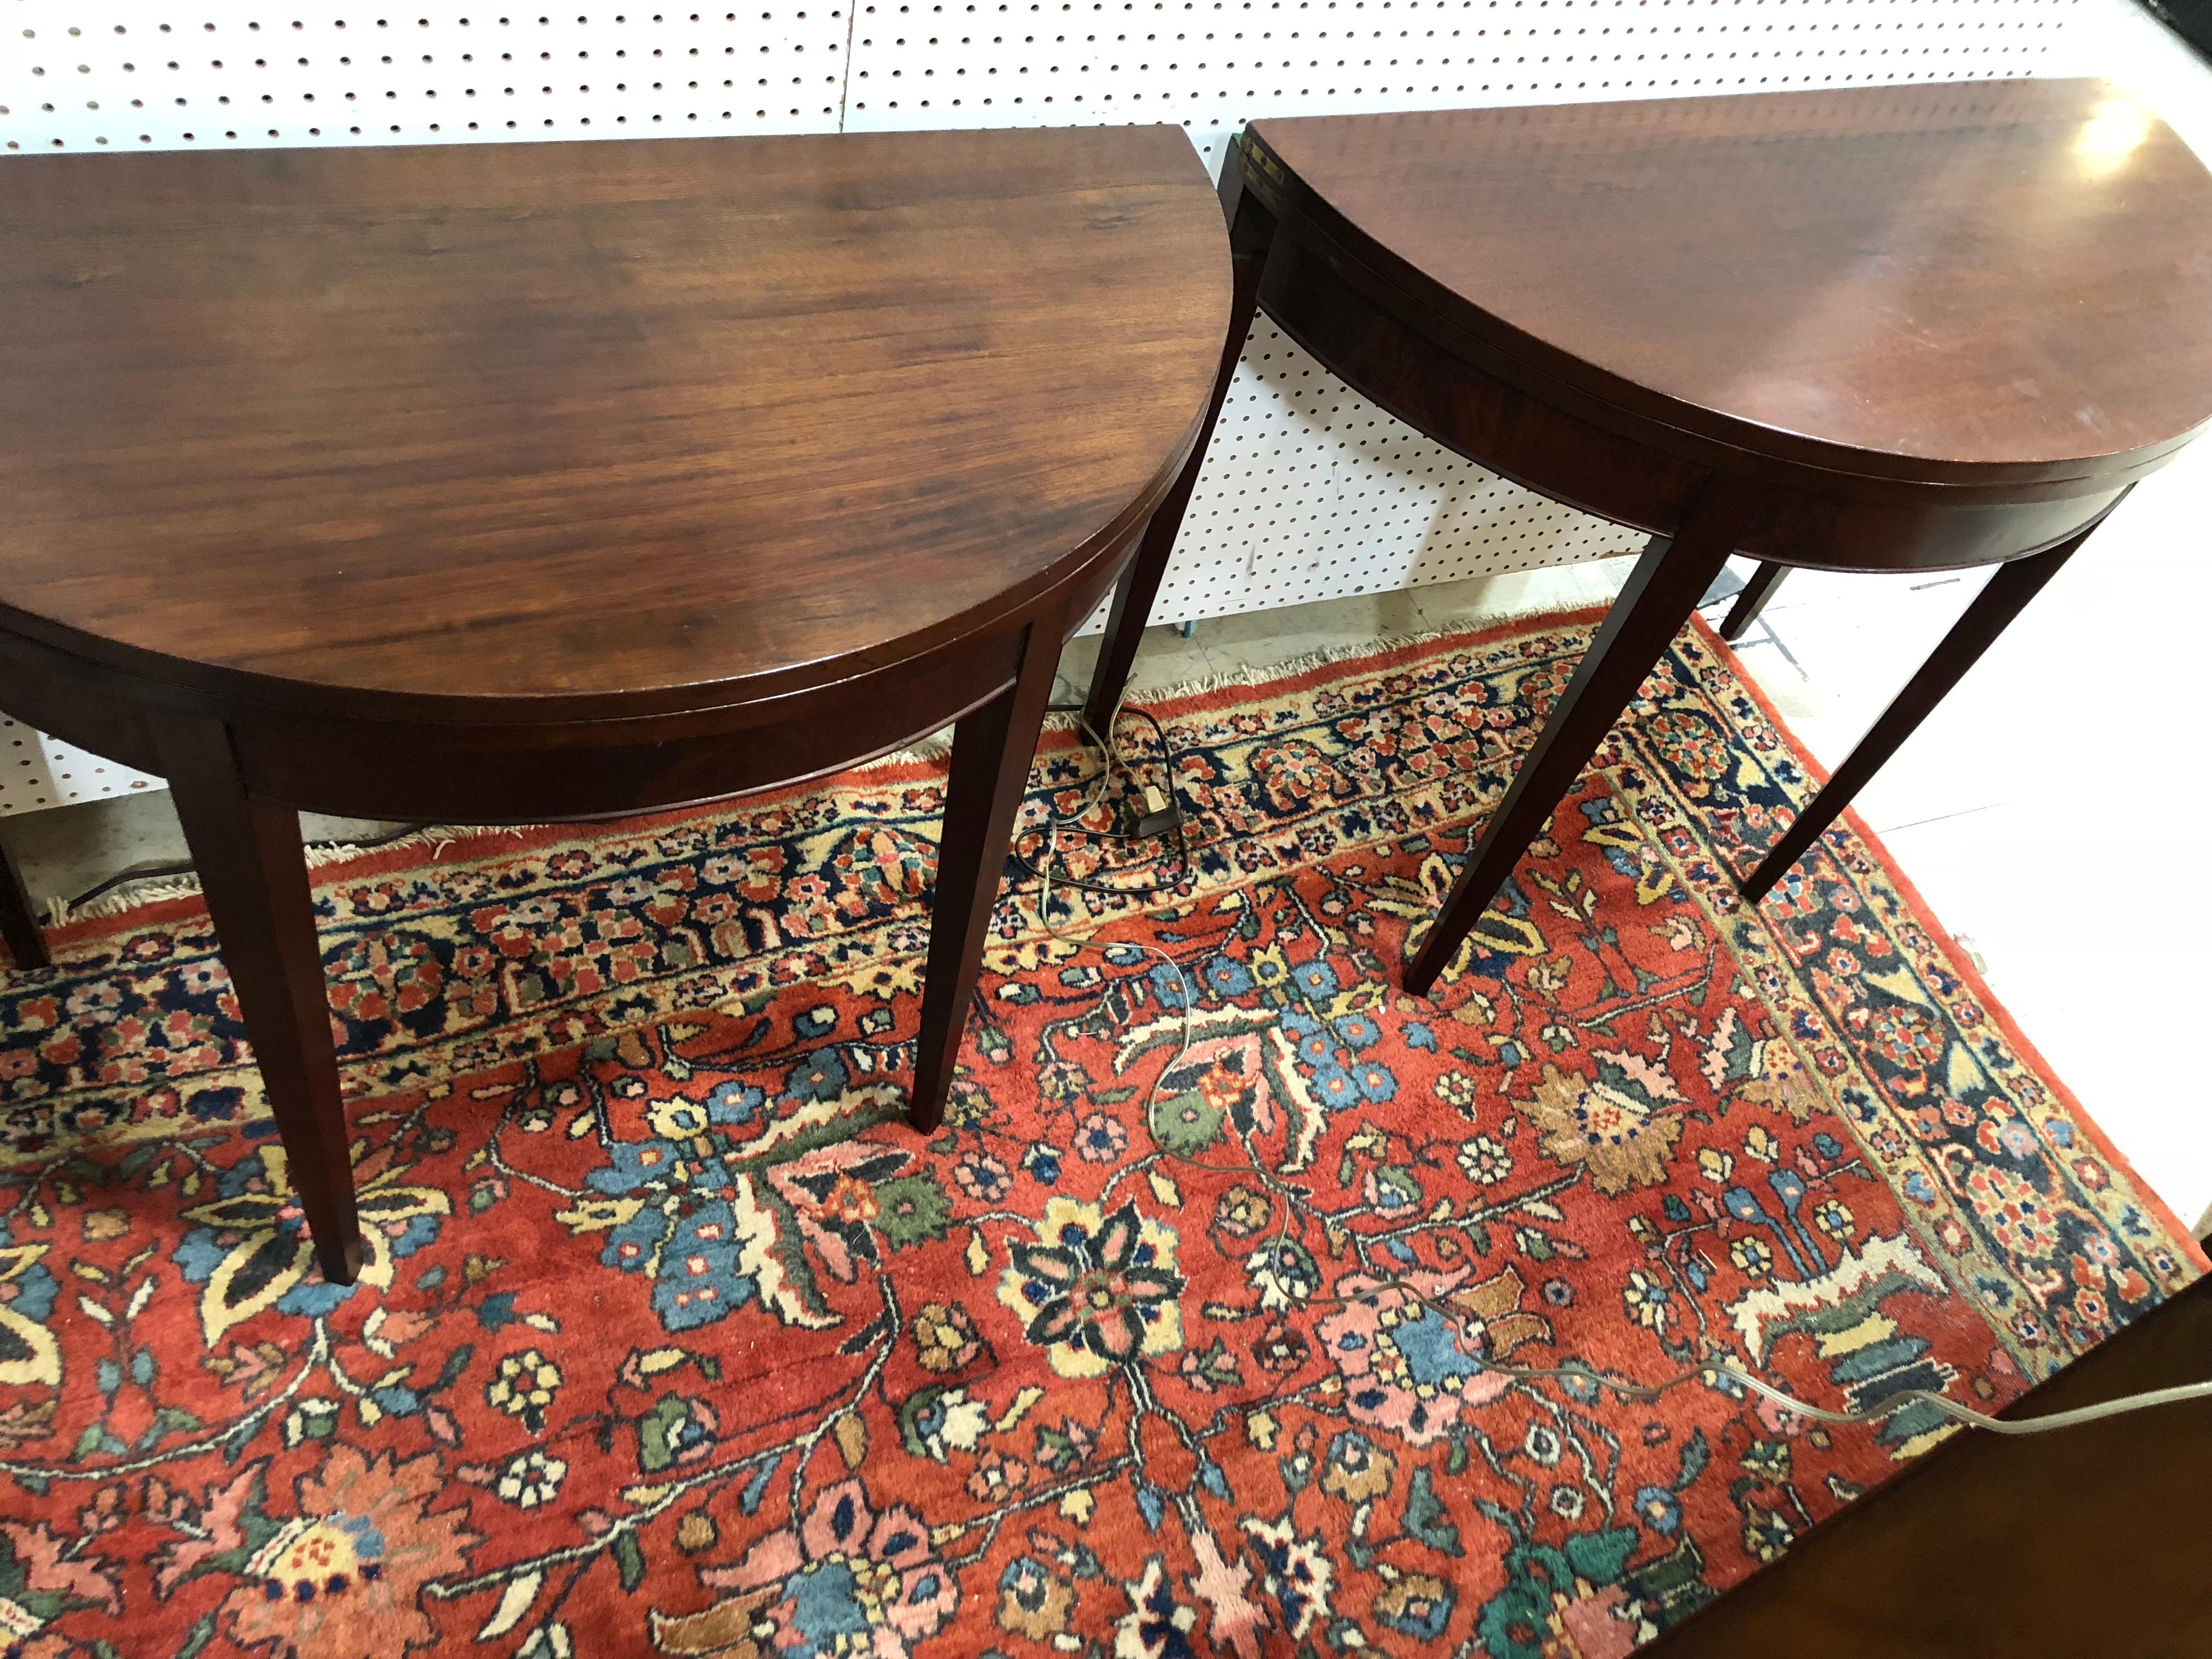 Exact pair of demilune flip top tables in mahogany. Great size, nice color, 1 gate leg on each to support the top to make a round table. Very sturdy, nice finish, a nice small pair of tables.